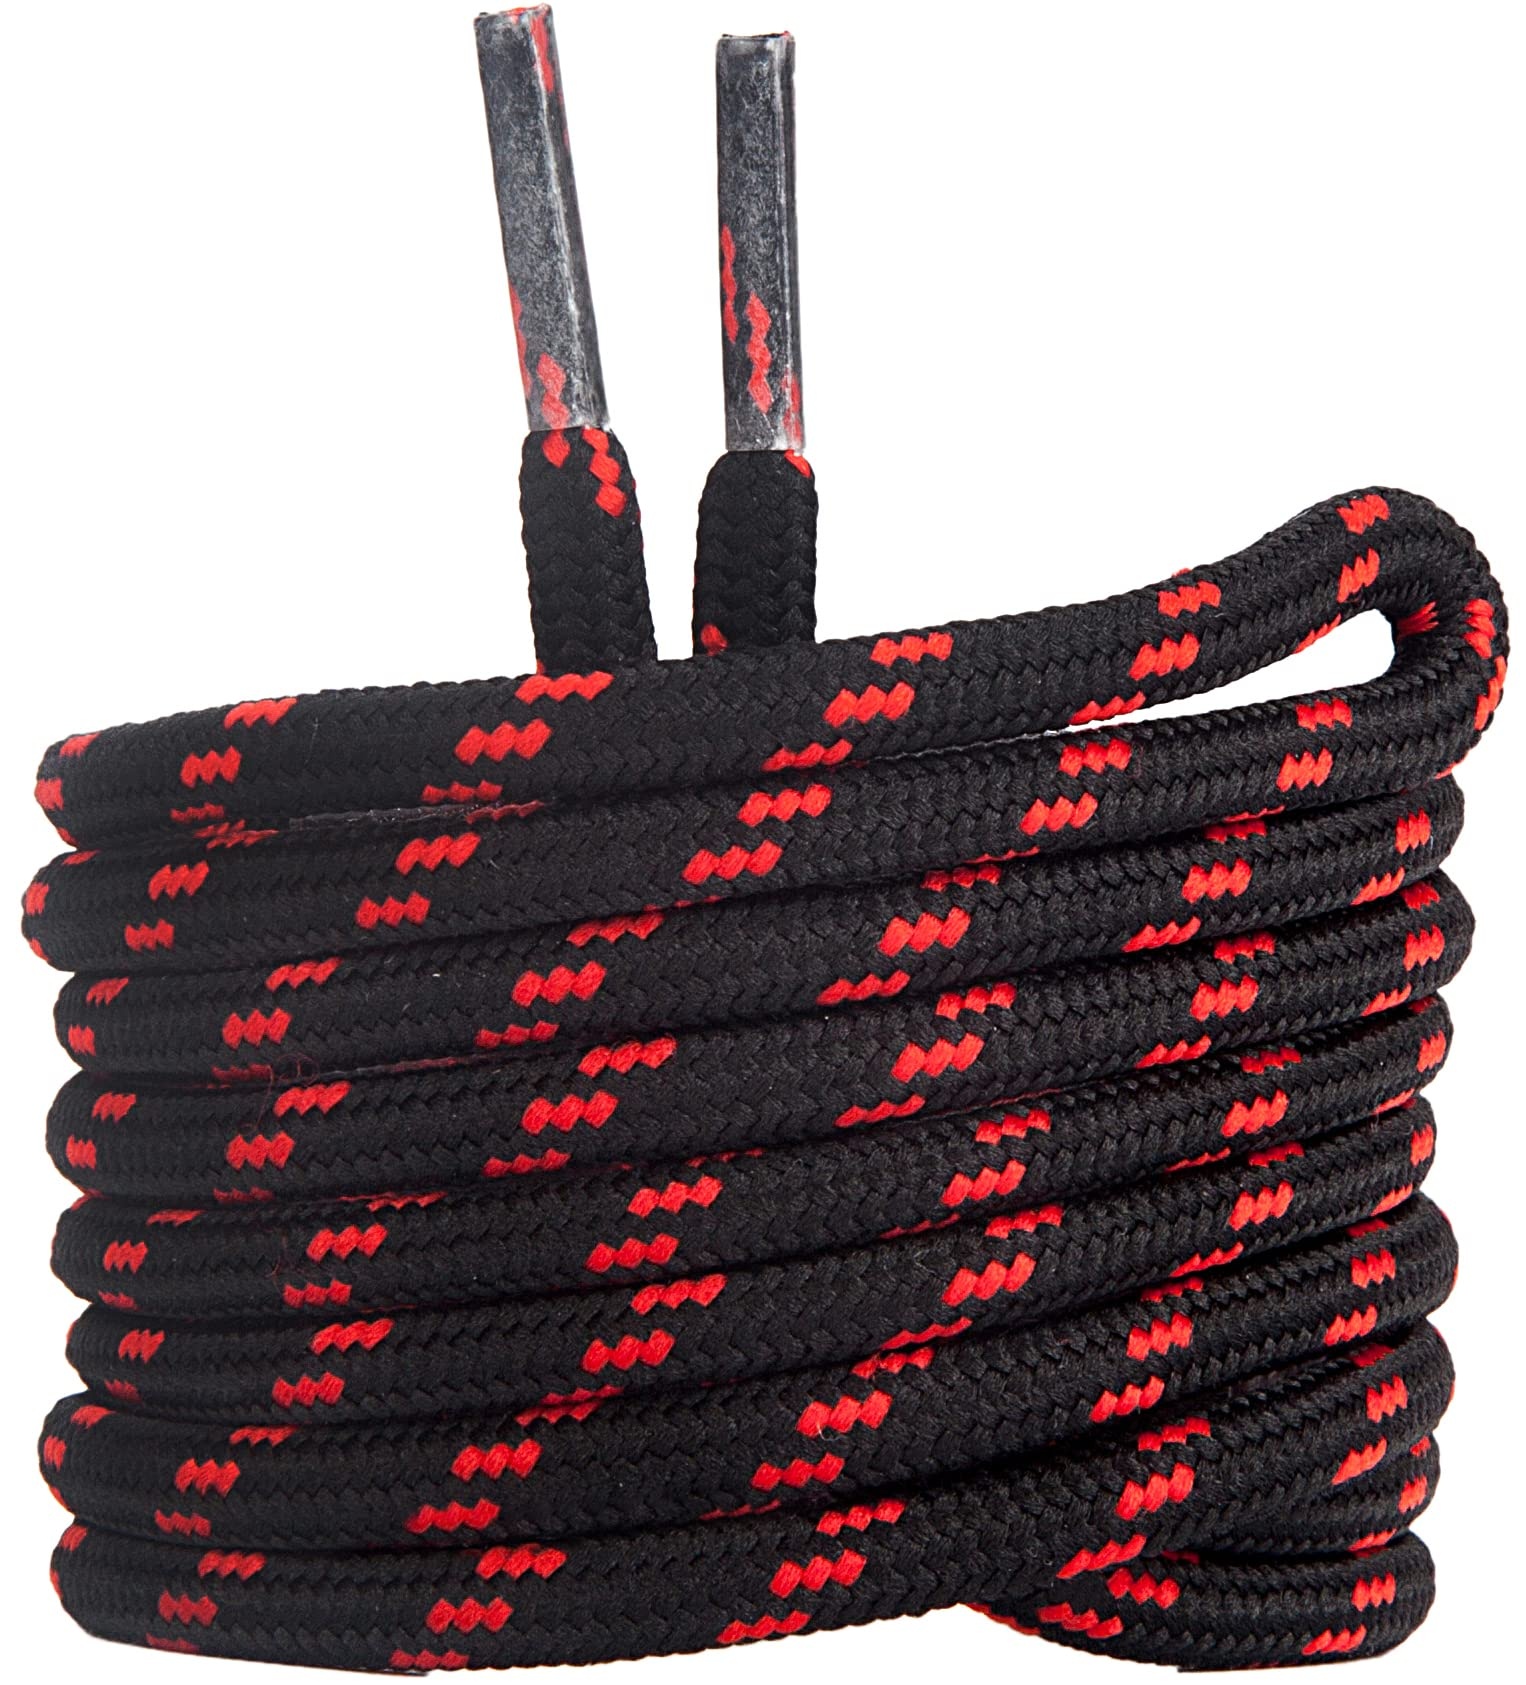 Tolumo Diameter 4.5 MM Round Durable Boot Laces Lengths 100 to 160 CM Shoelaces for Work and Leisure Boots, Hiking Shoes Black Red 100 CM 1 Pair